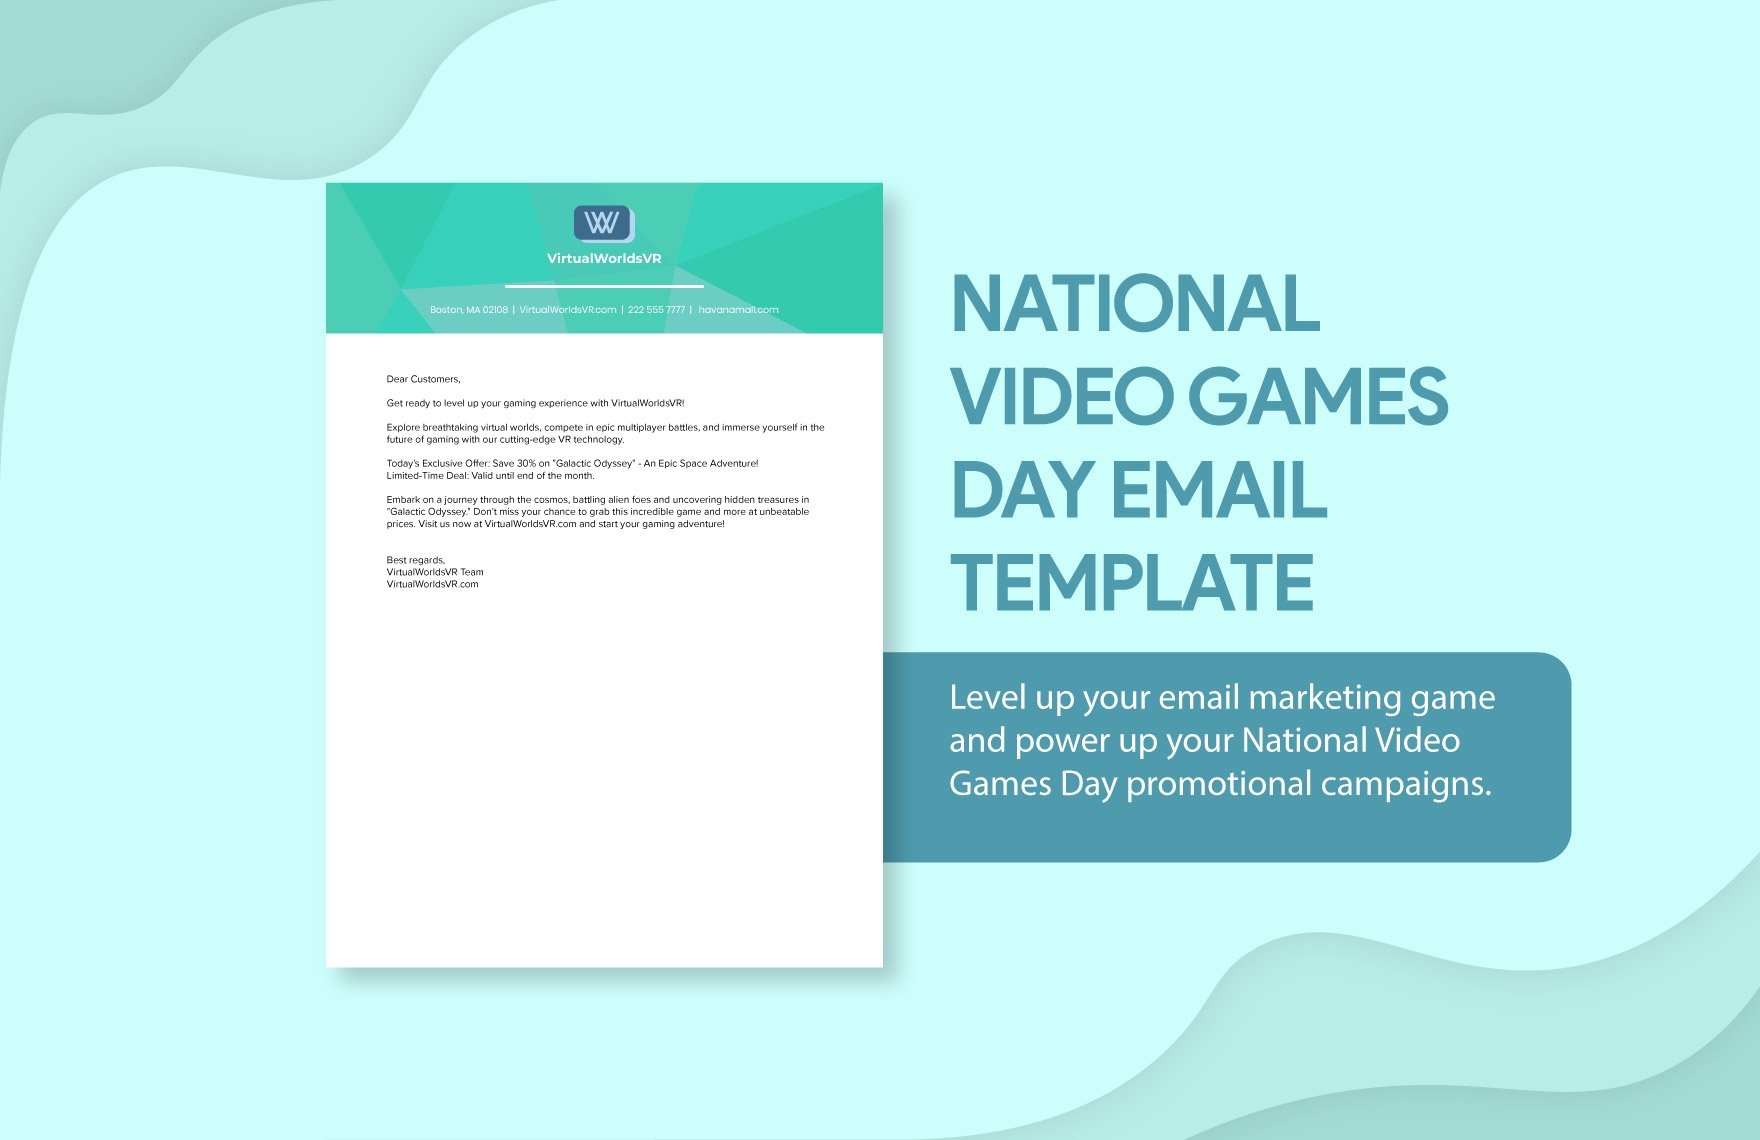 National Video Games Day Email Template